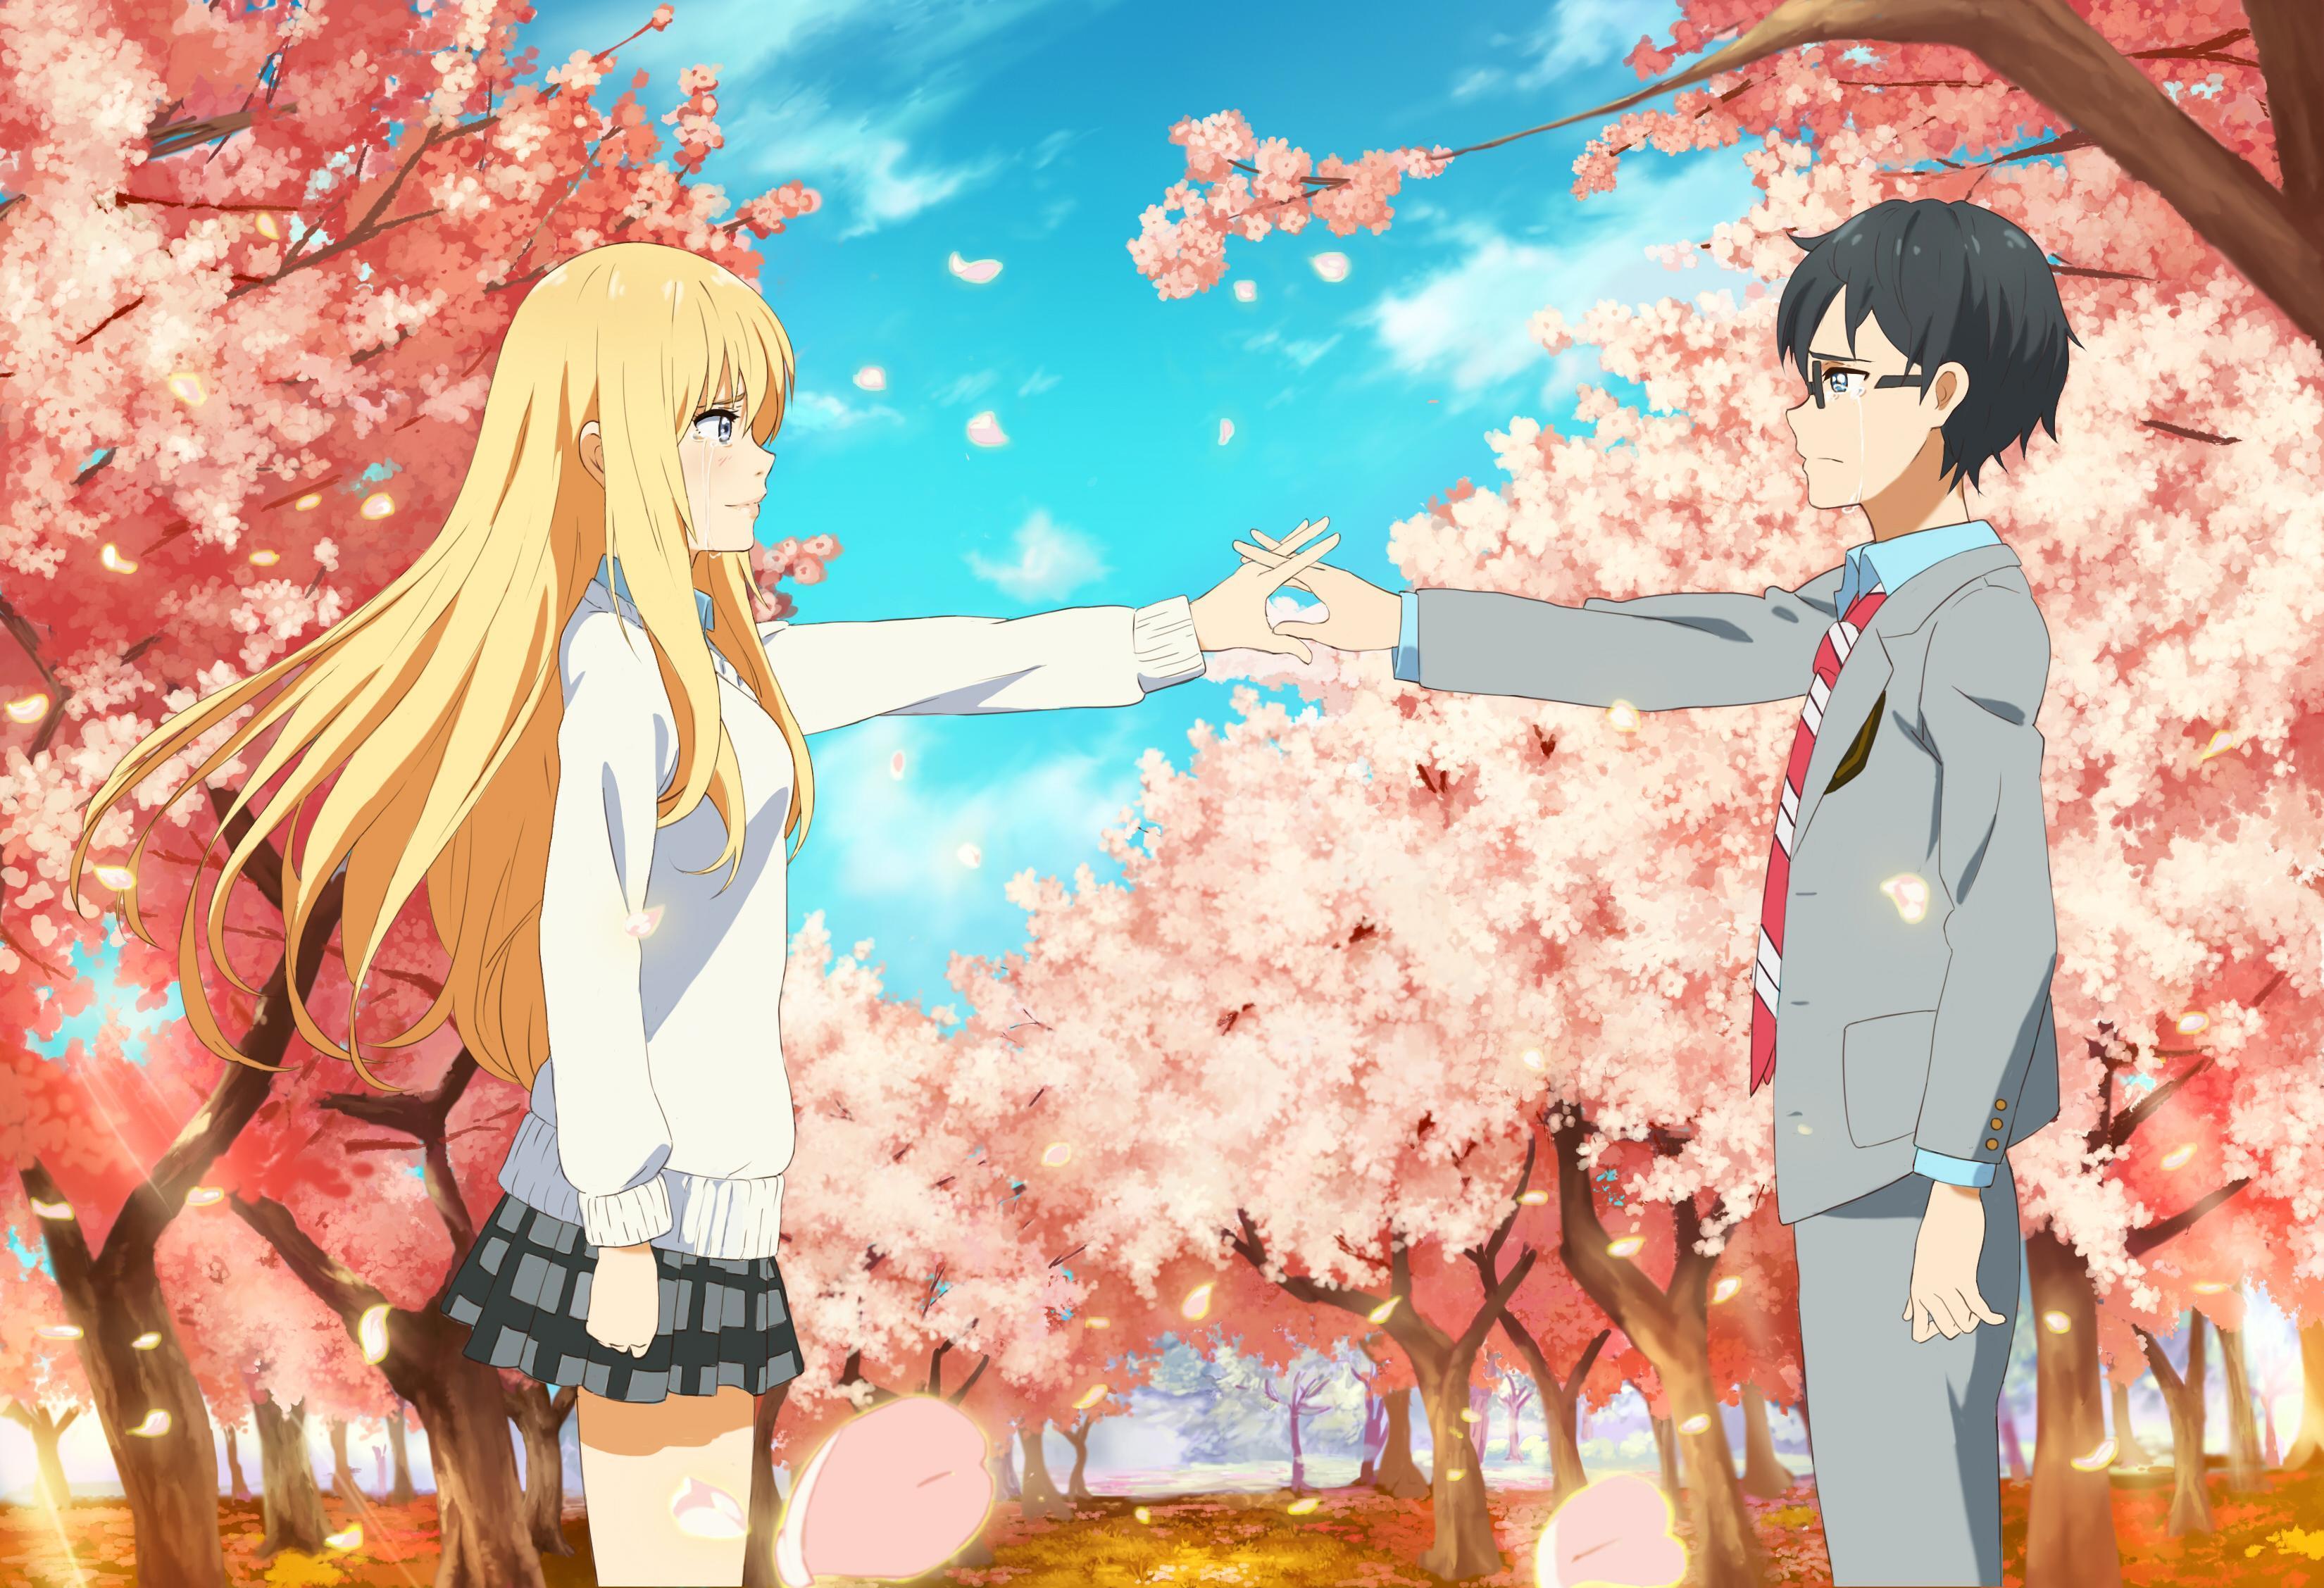 Your Lie In April Quotes Absolutely Worth Sharing!